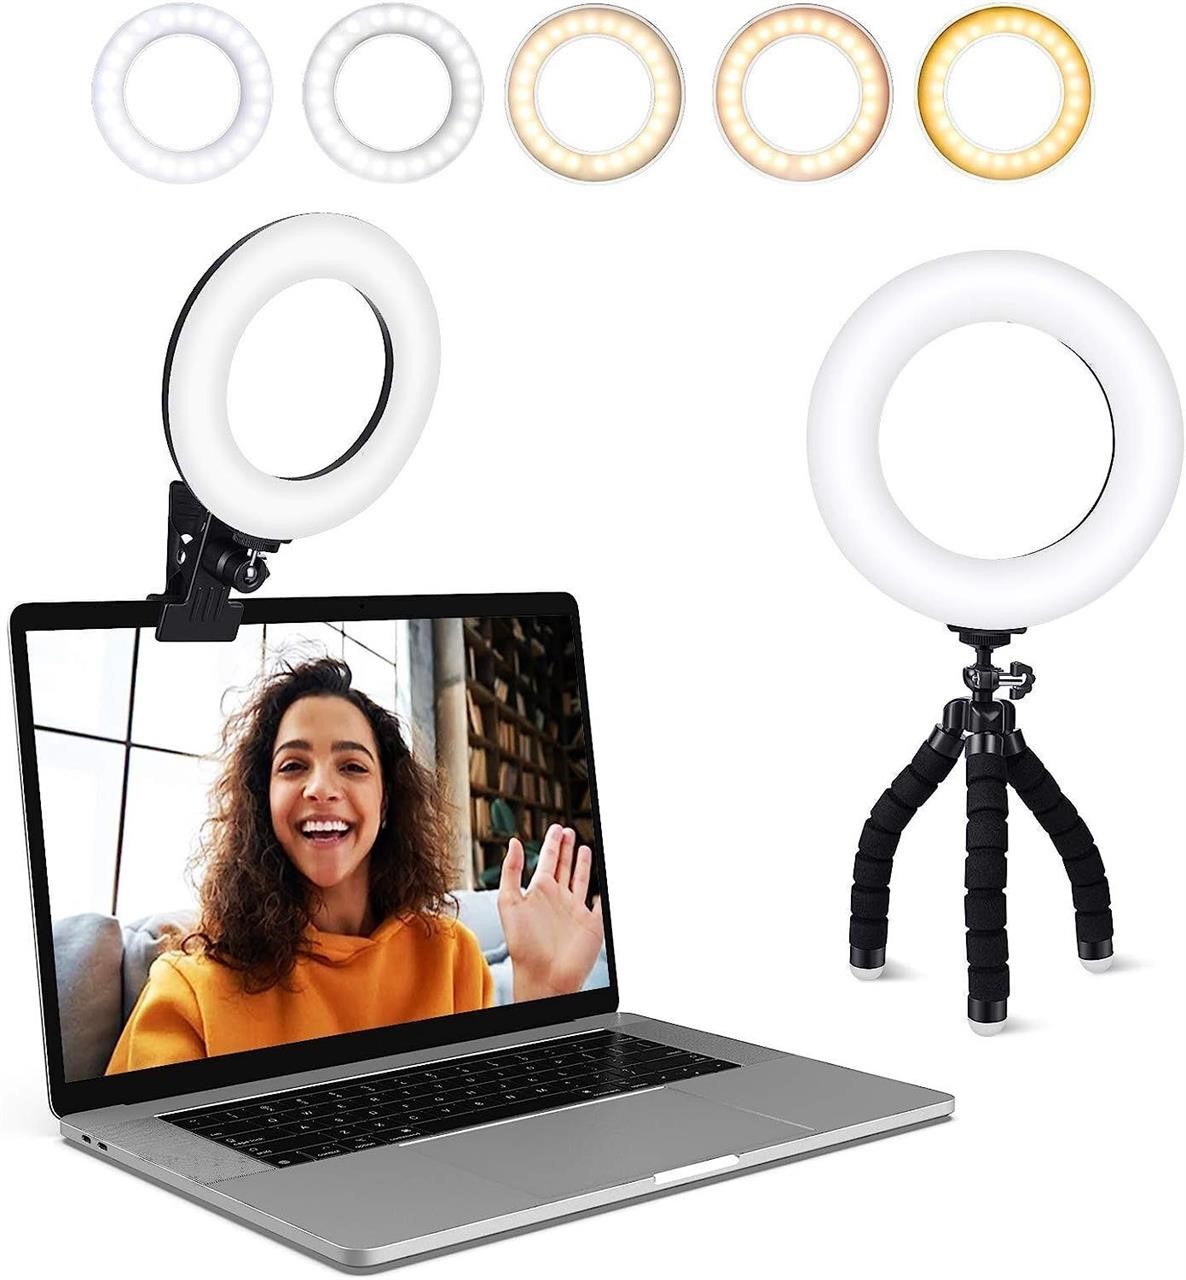 New Video Conference Lighting Kit